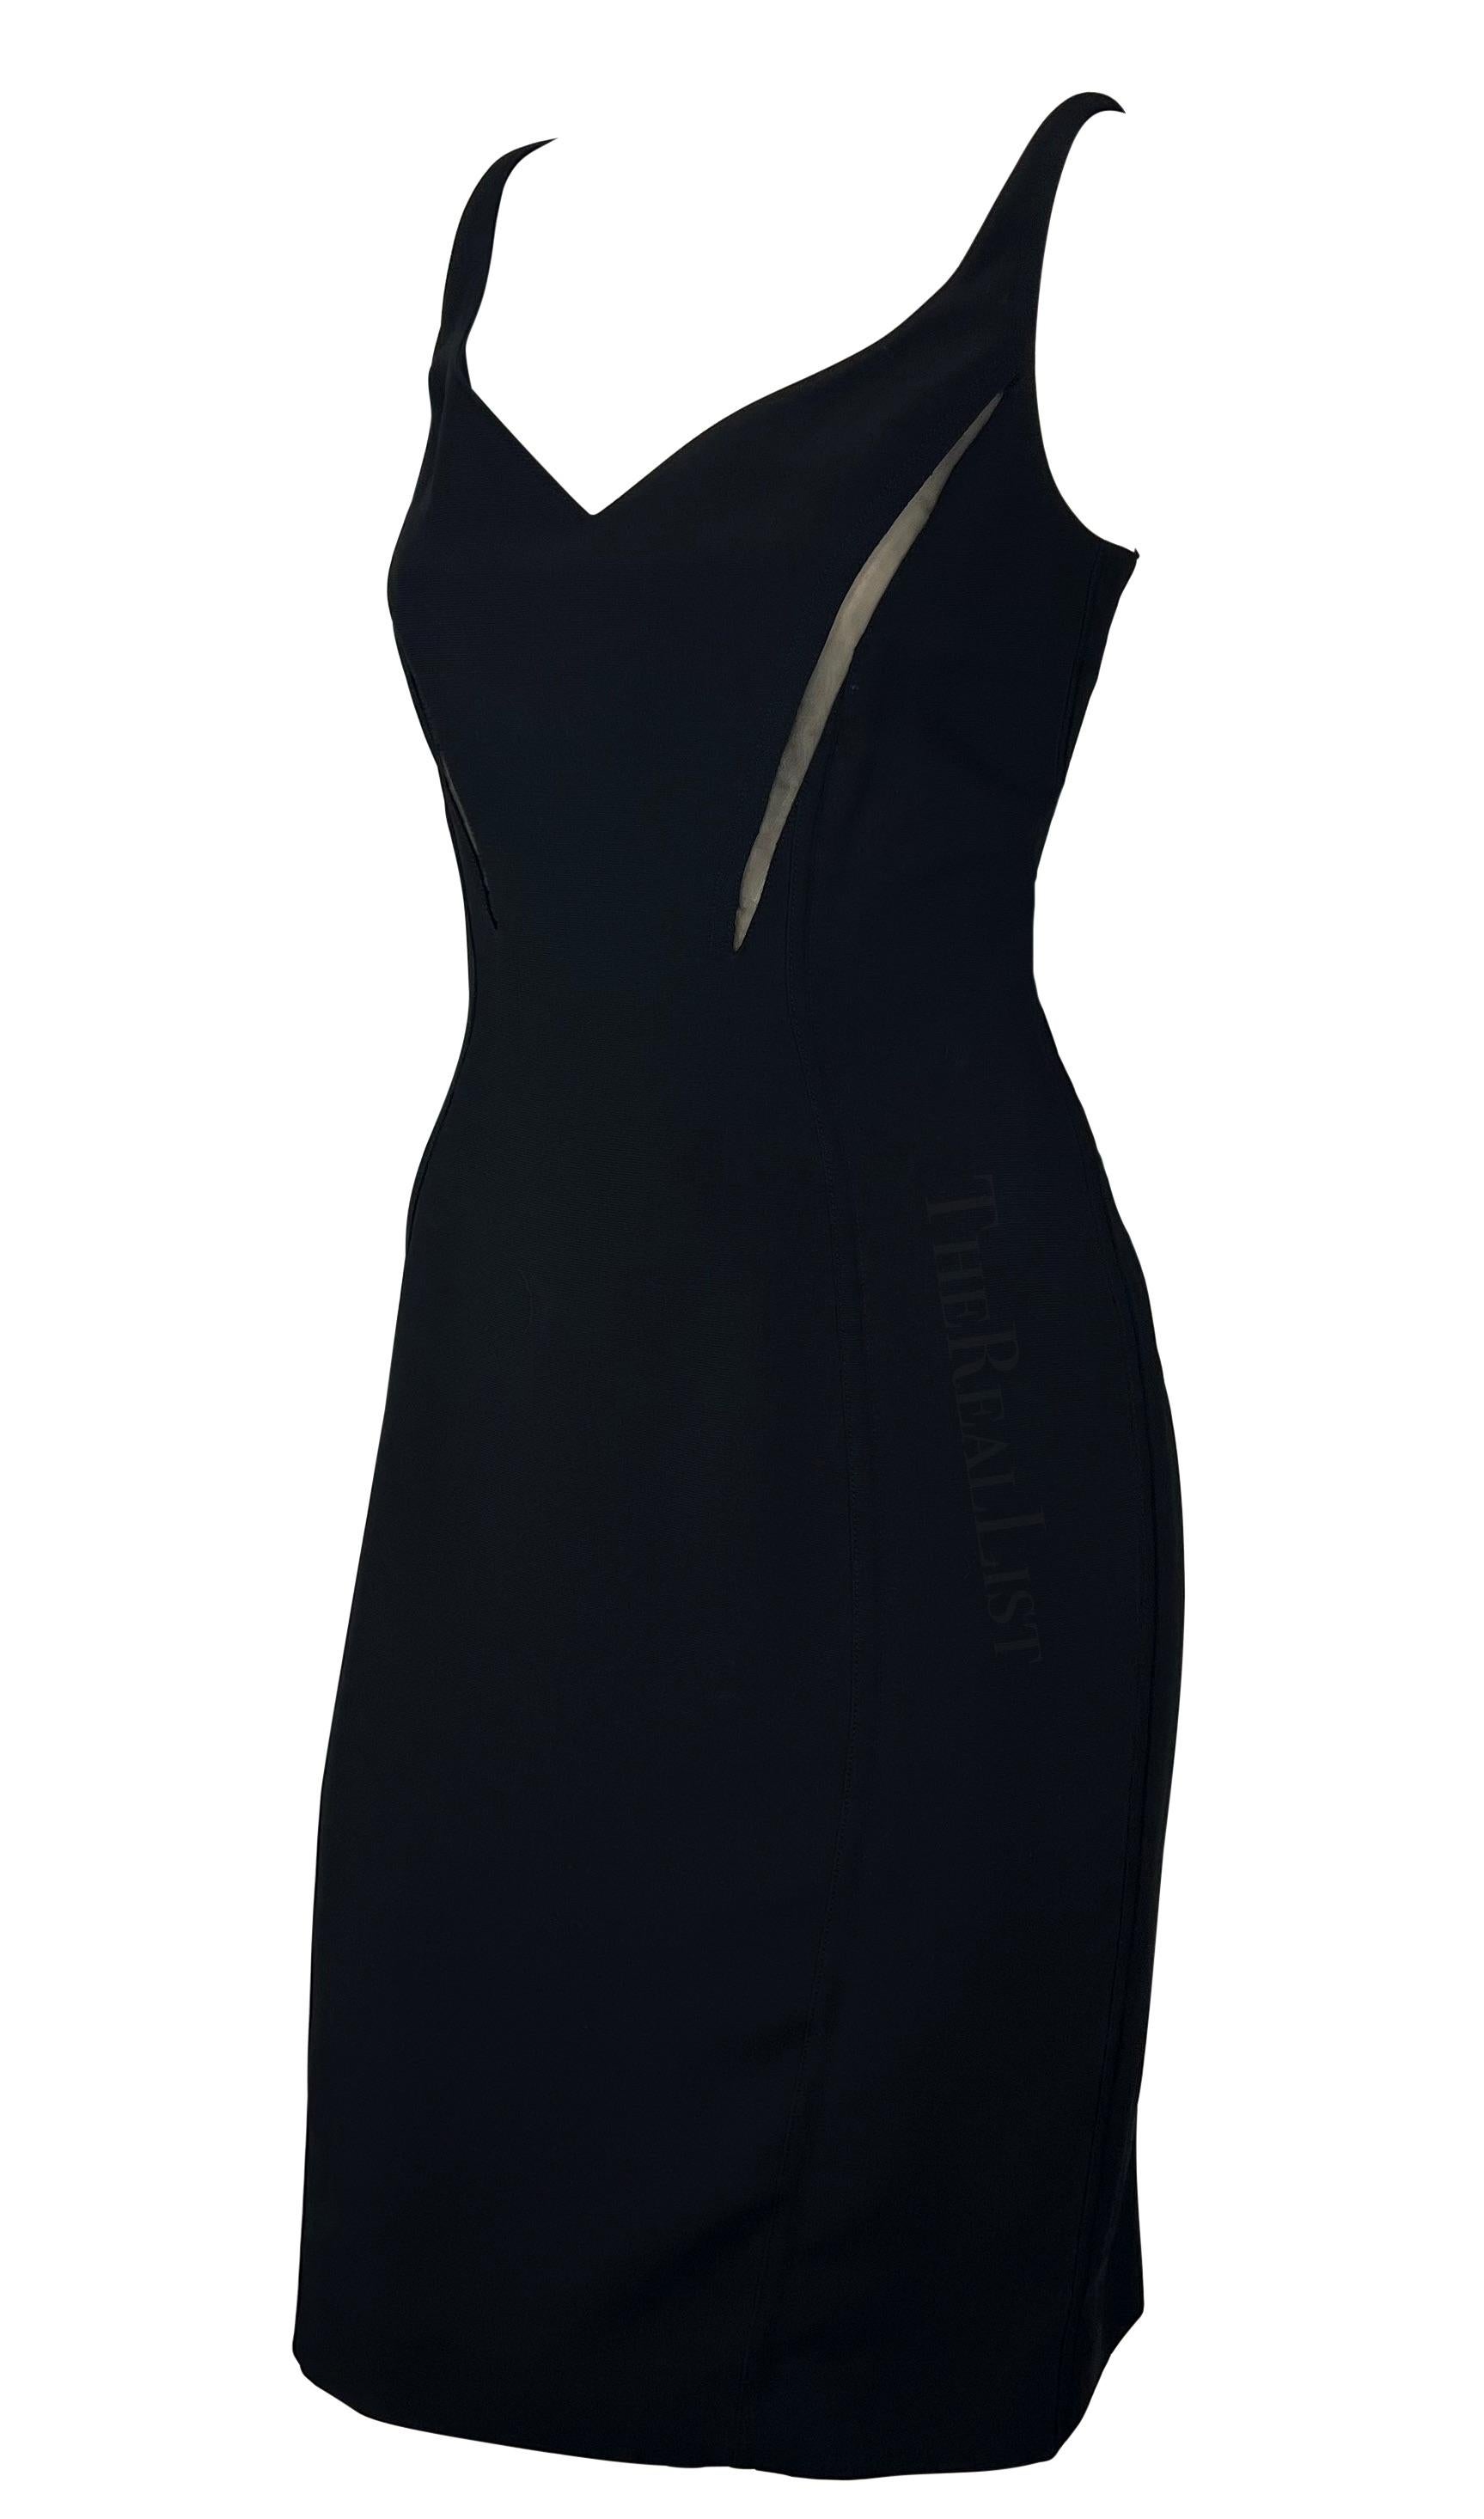 Presenting a fabulous black Thierry Mugler mini dress, designed by Manfred Mugler. From the Spring/Summer 1999 collection, this sleeveless mini dress features a sweetheart neckline and is made complete with two mesh-covered cutouts at either side of